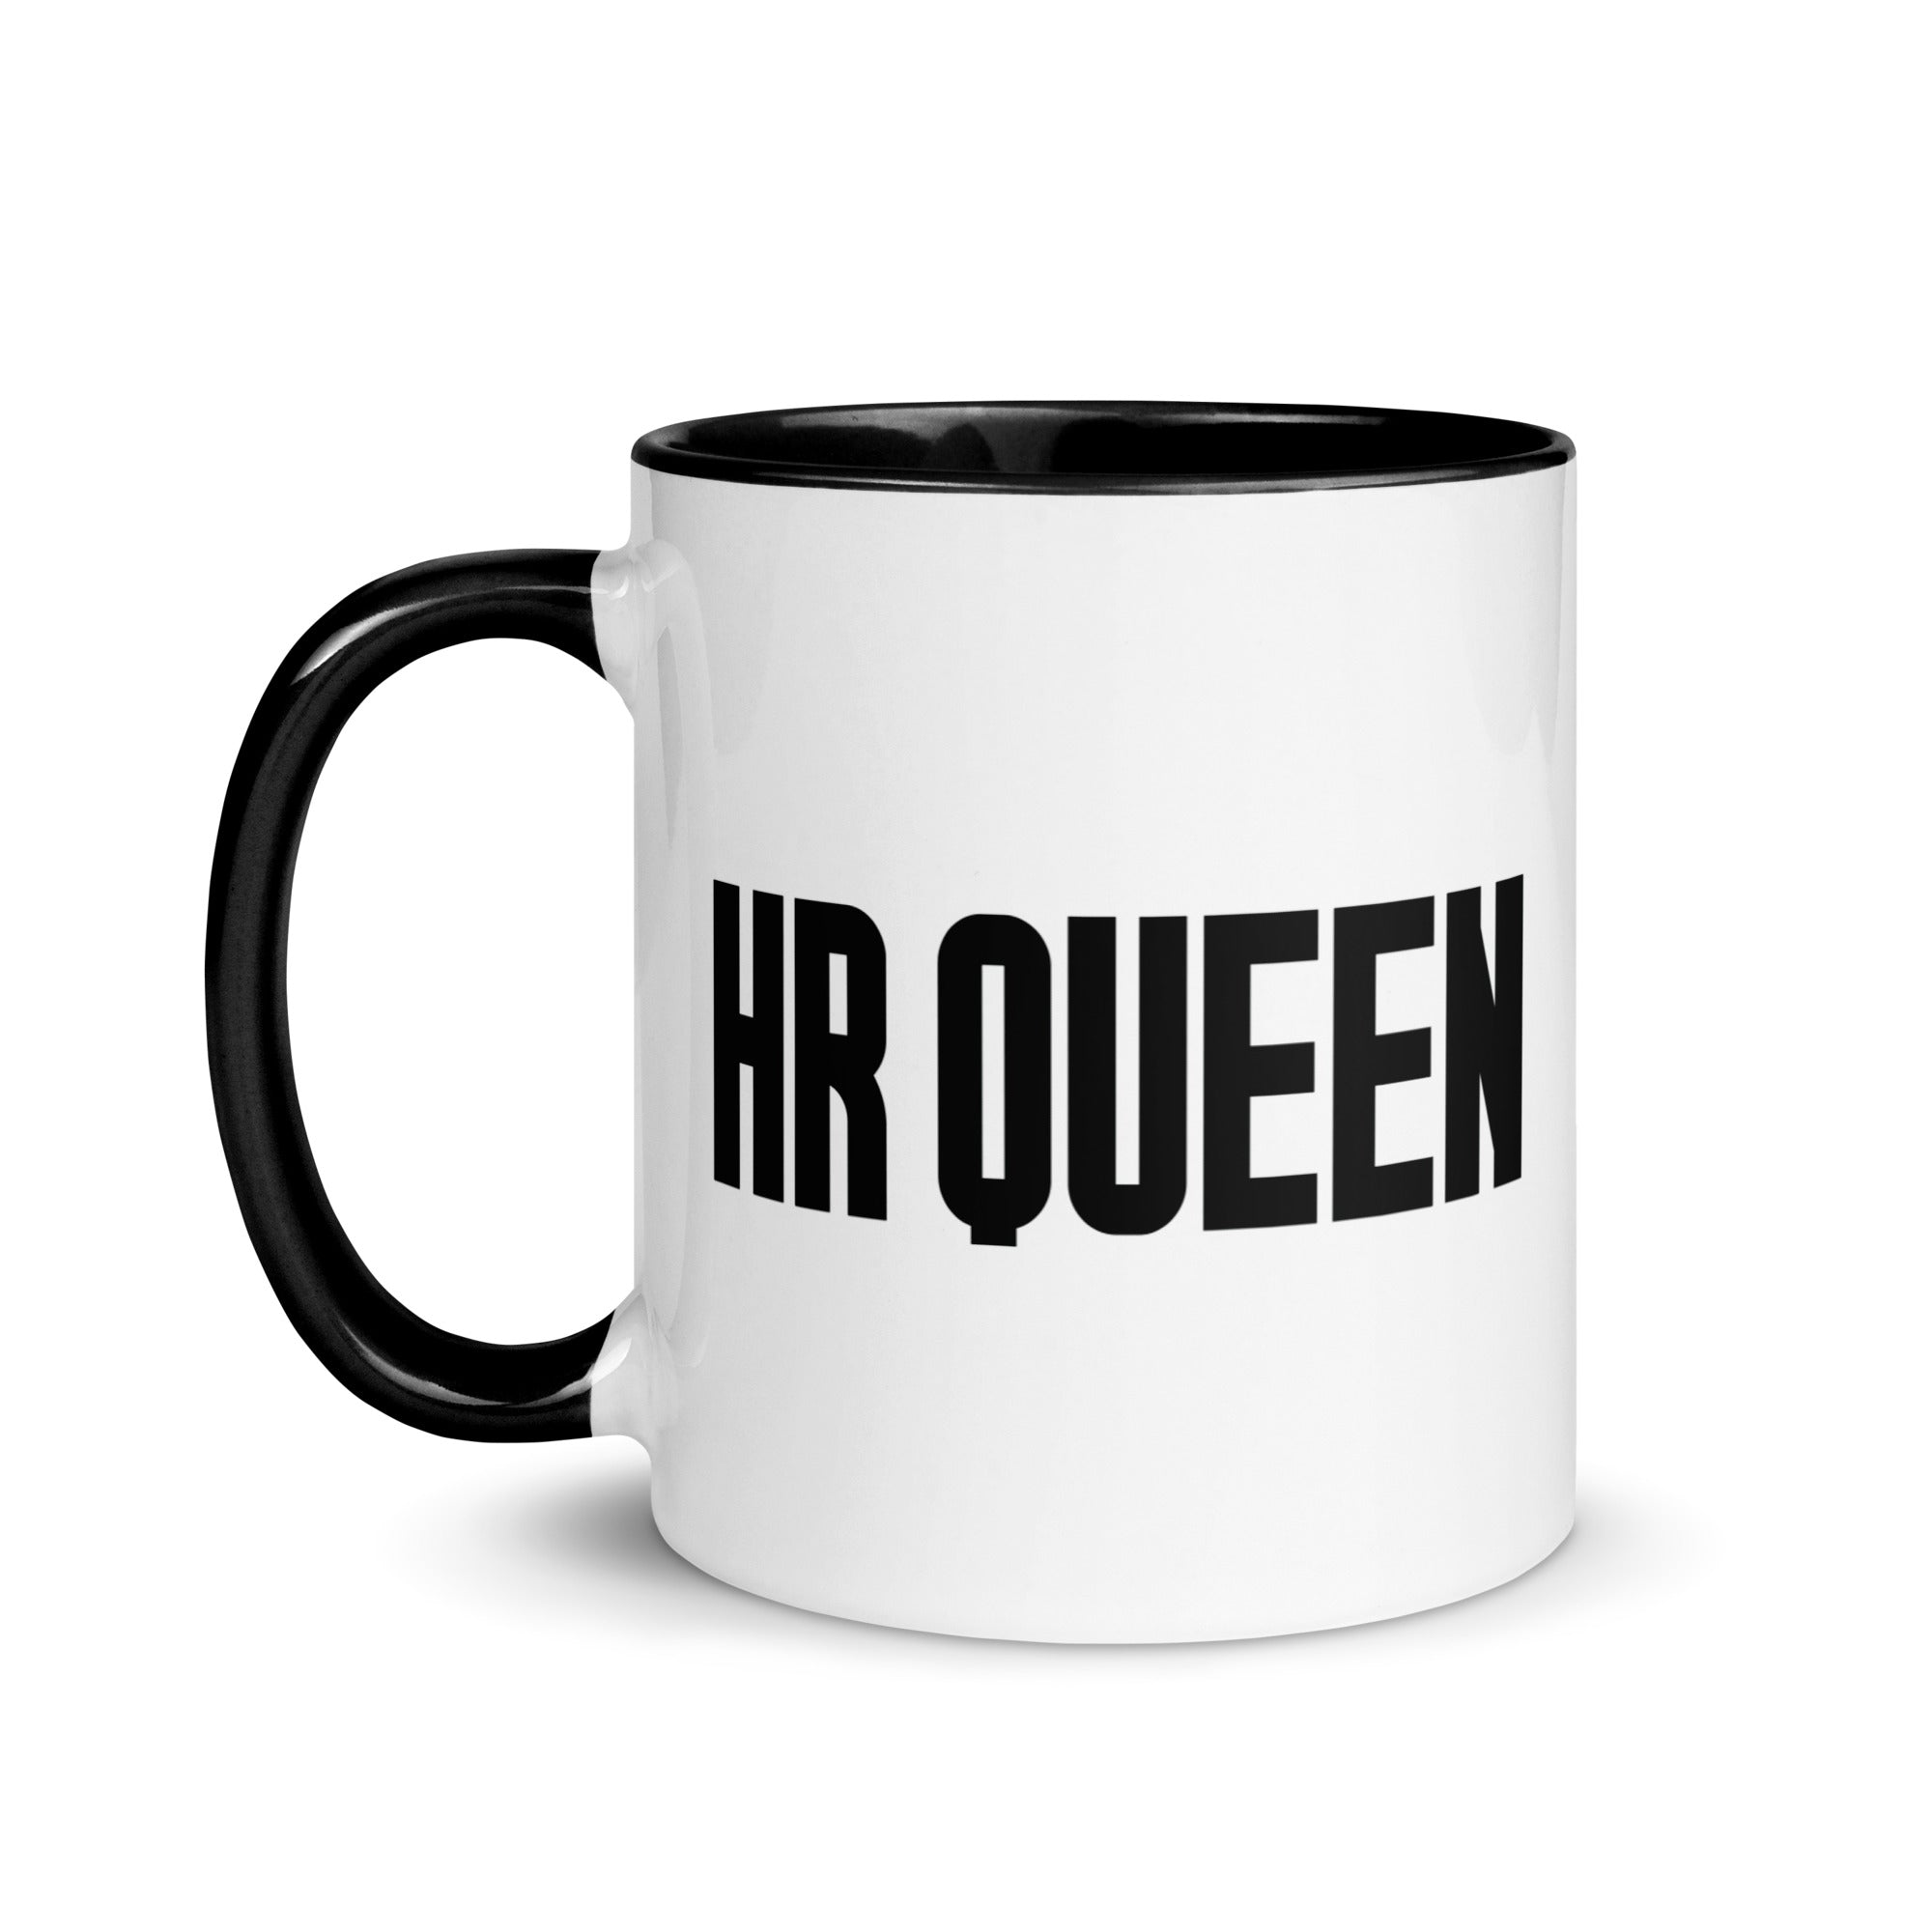 Mug with Color Inside | HR Queen